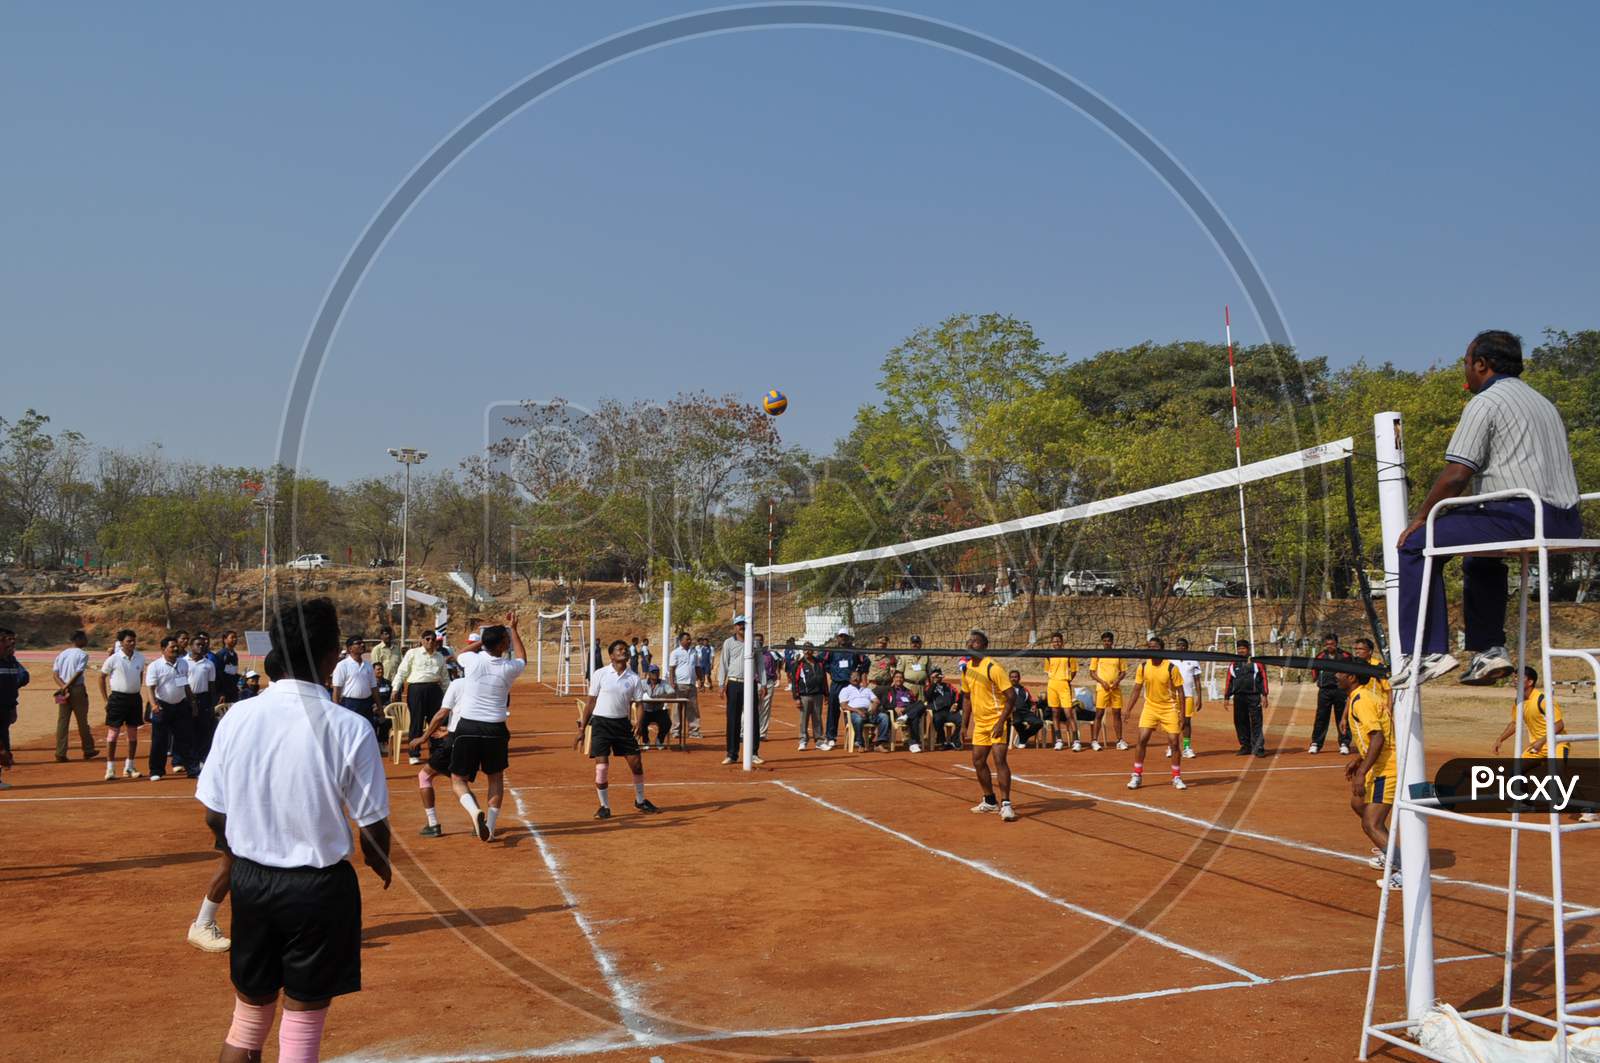 Players Playing Volleyball At a Court